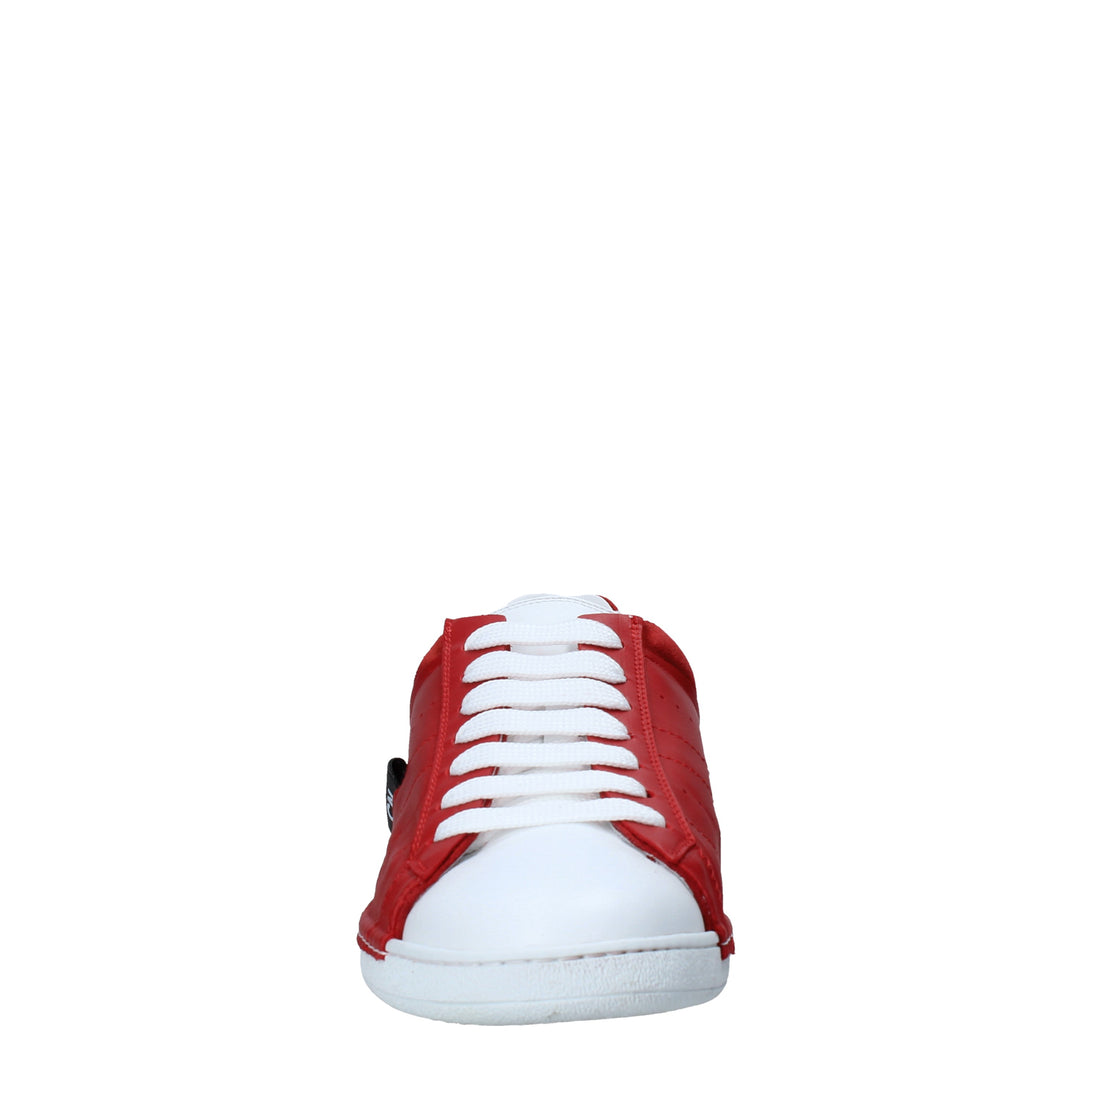 Sneakers Rosso Costume National